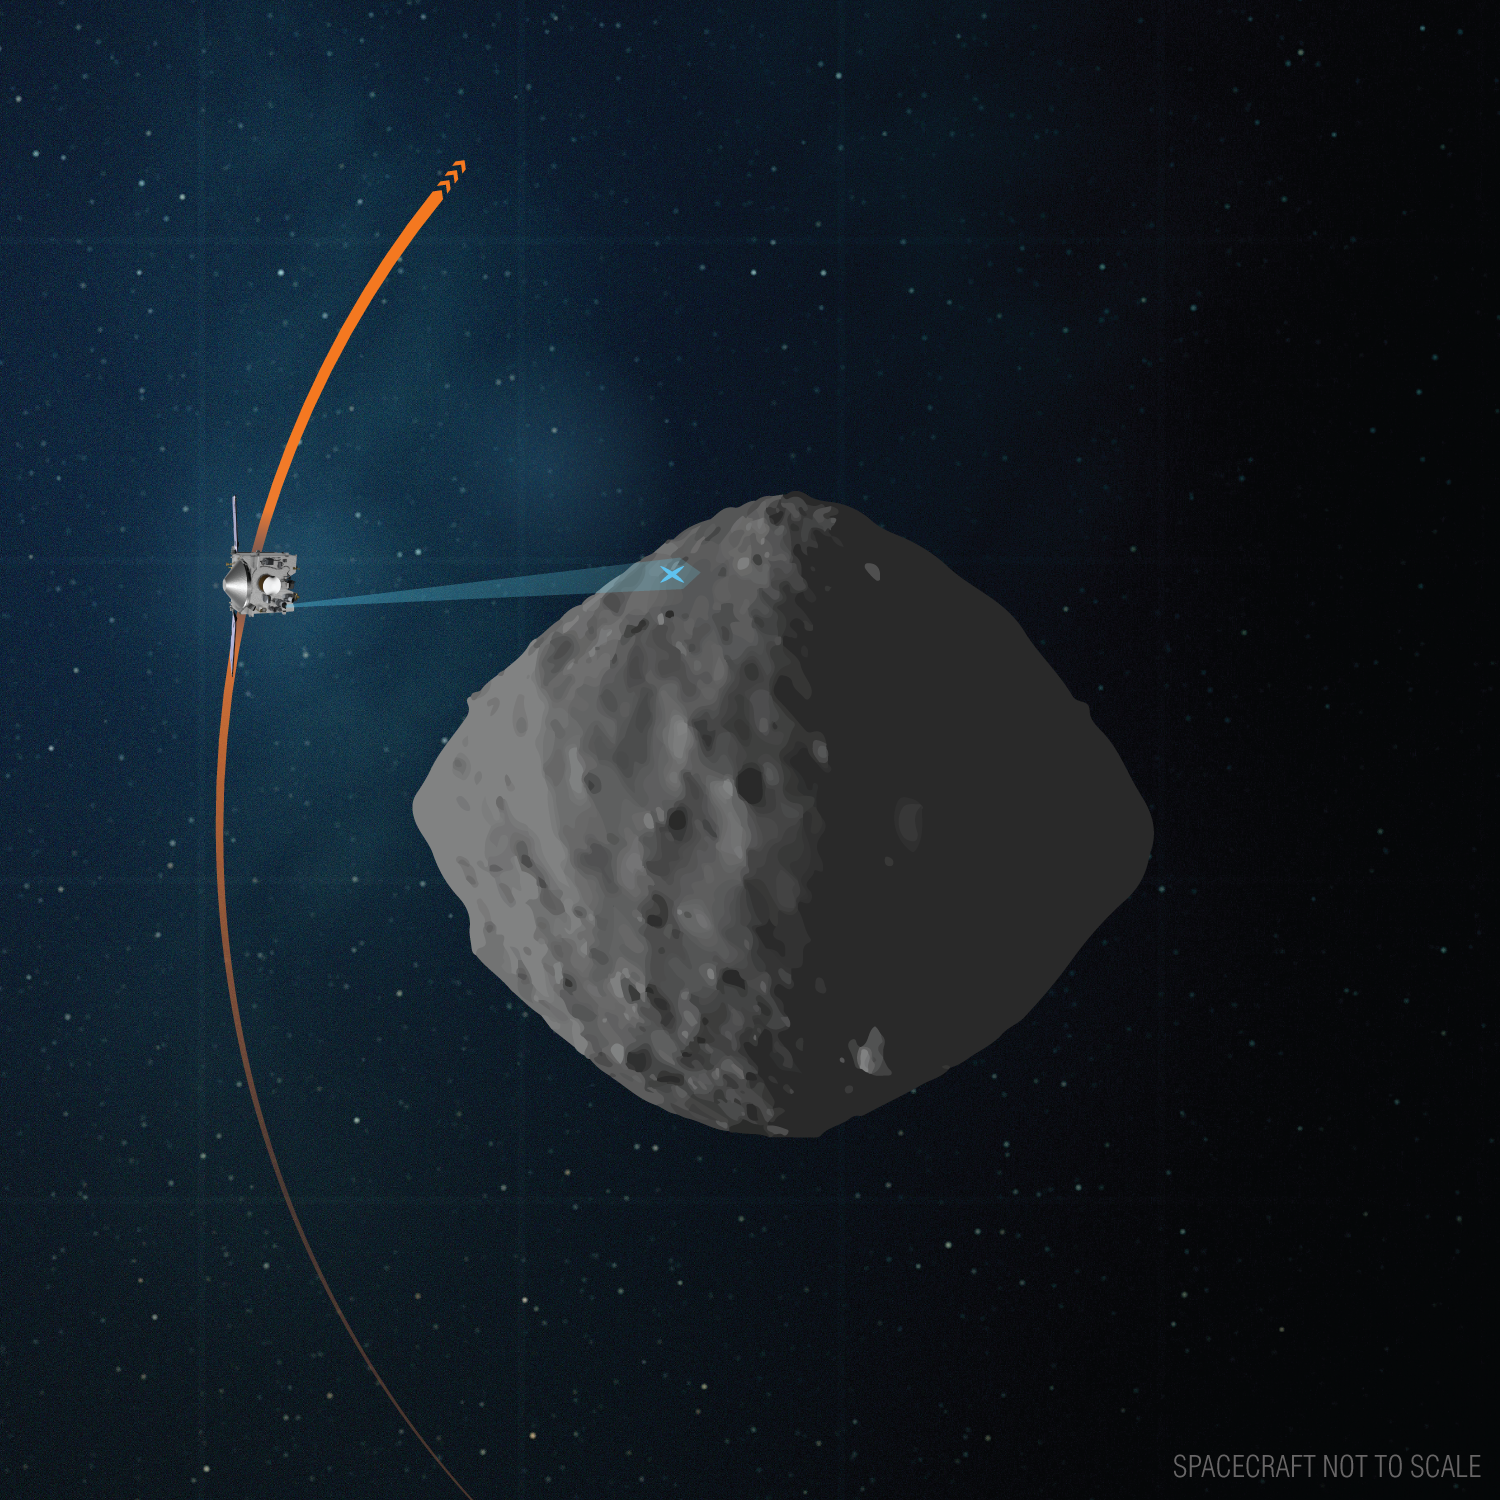 spacecraft and asteroid with trajectory drawn in